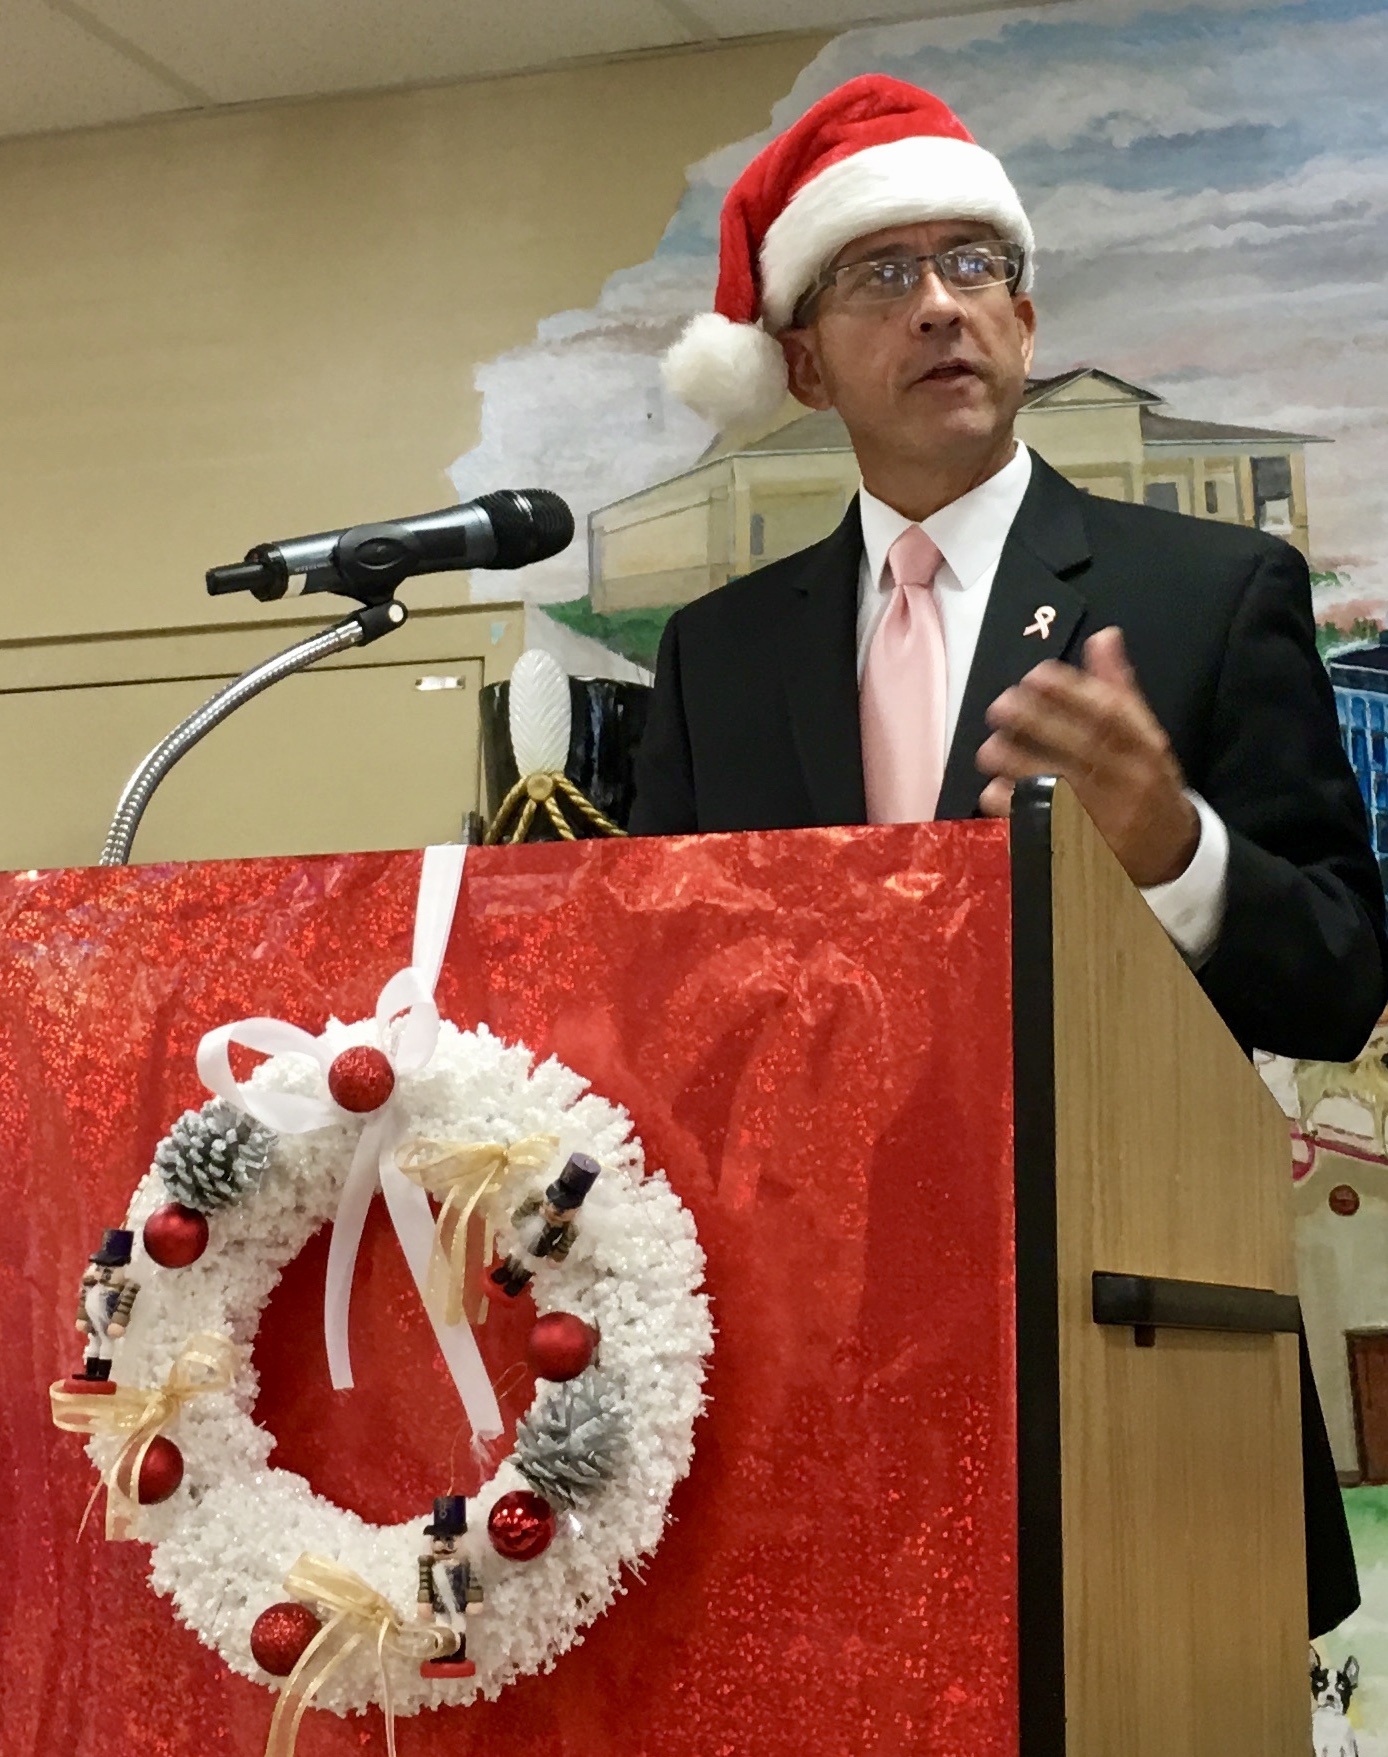 Each year, Keene’s Pointe resident and Great Oaks Village board chairman Warren Kenner helps kick off the village’s Christmas fundraising campaign. (Courtesy Warren Kenner)